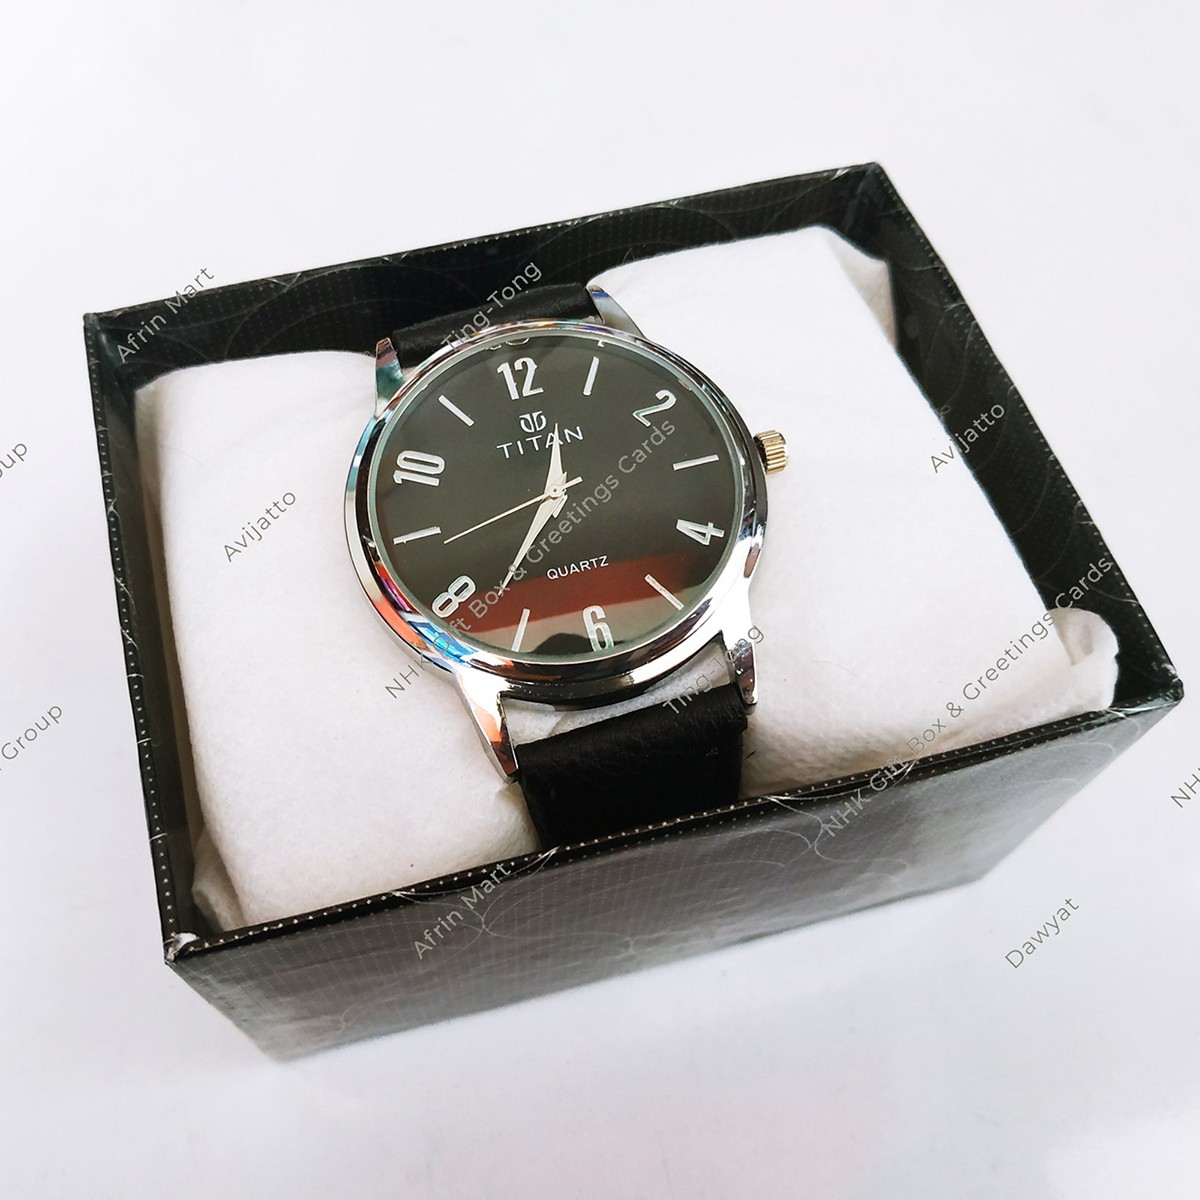 Black Strap Wrist Analog Watch For men By NHK With Box & Battery